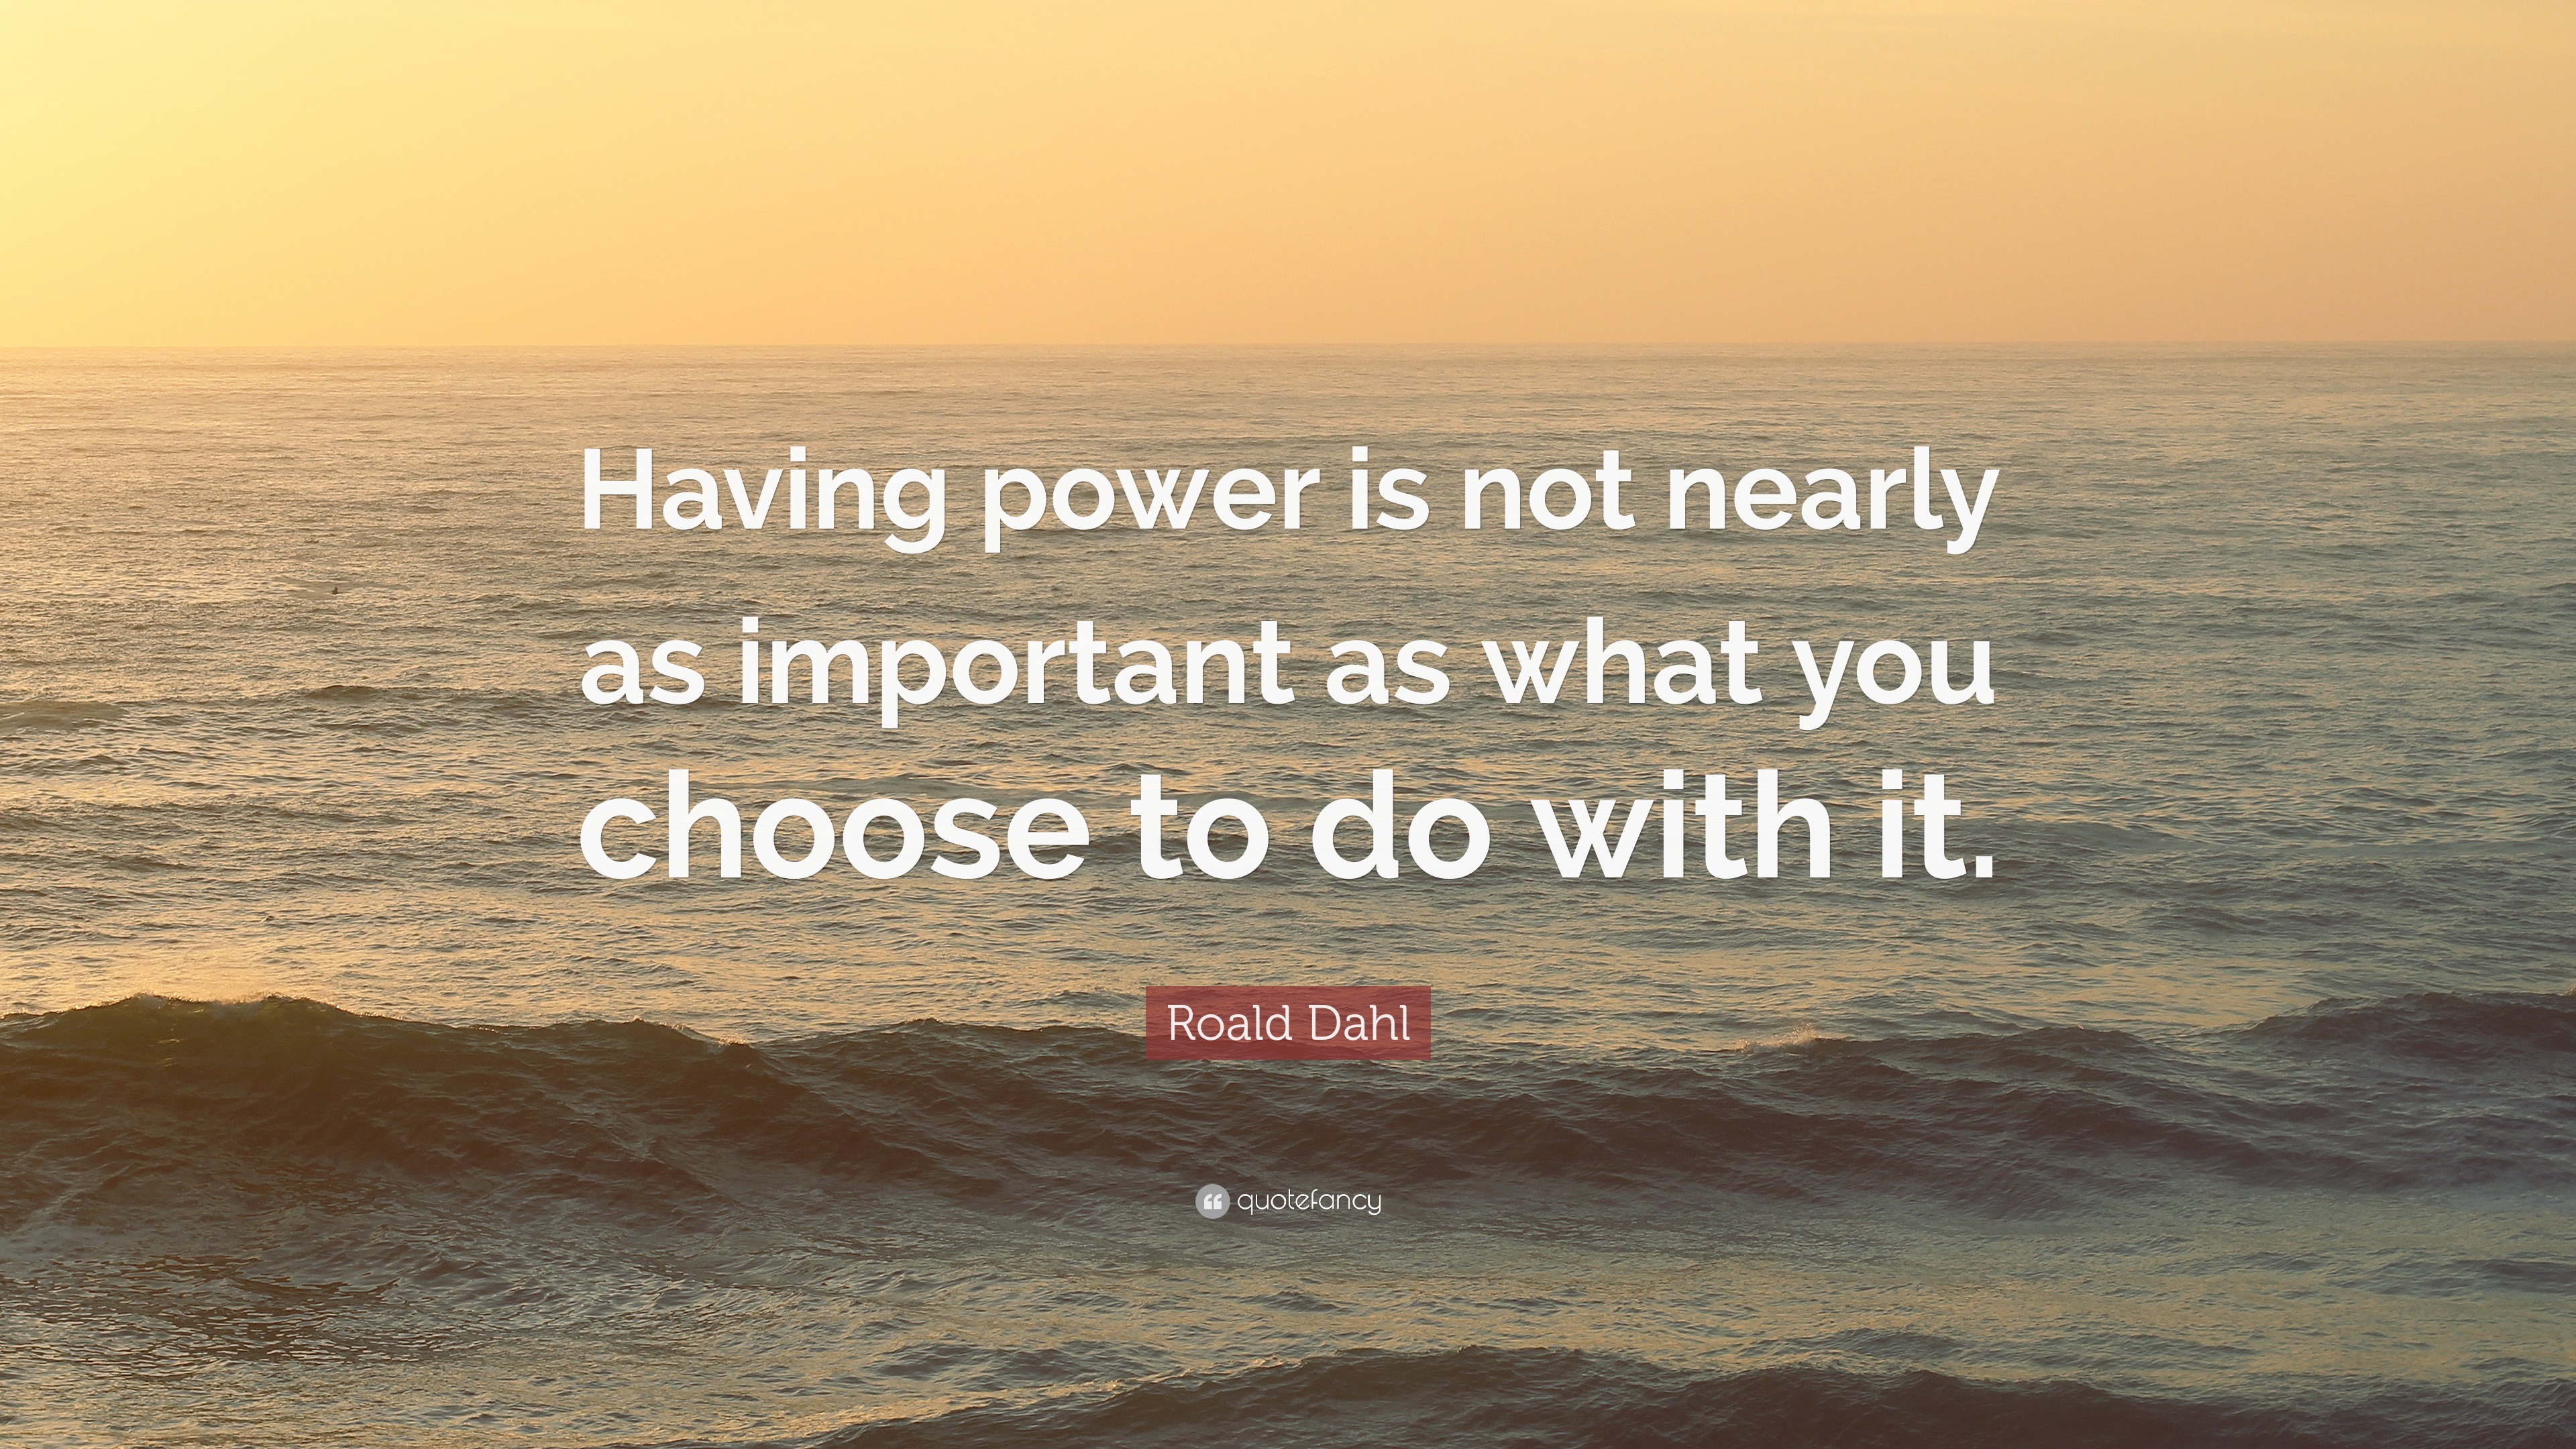 Roald Dahl Quote “Having power is not nearly as important